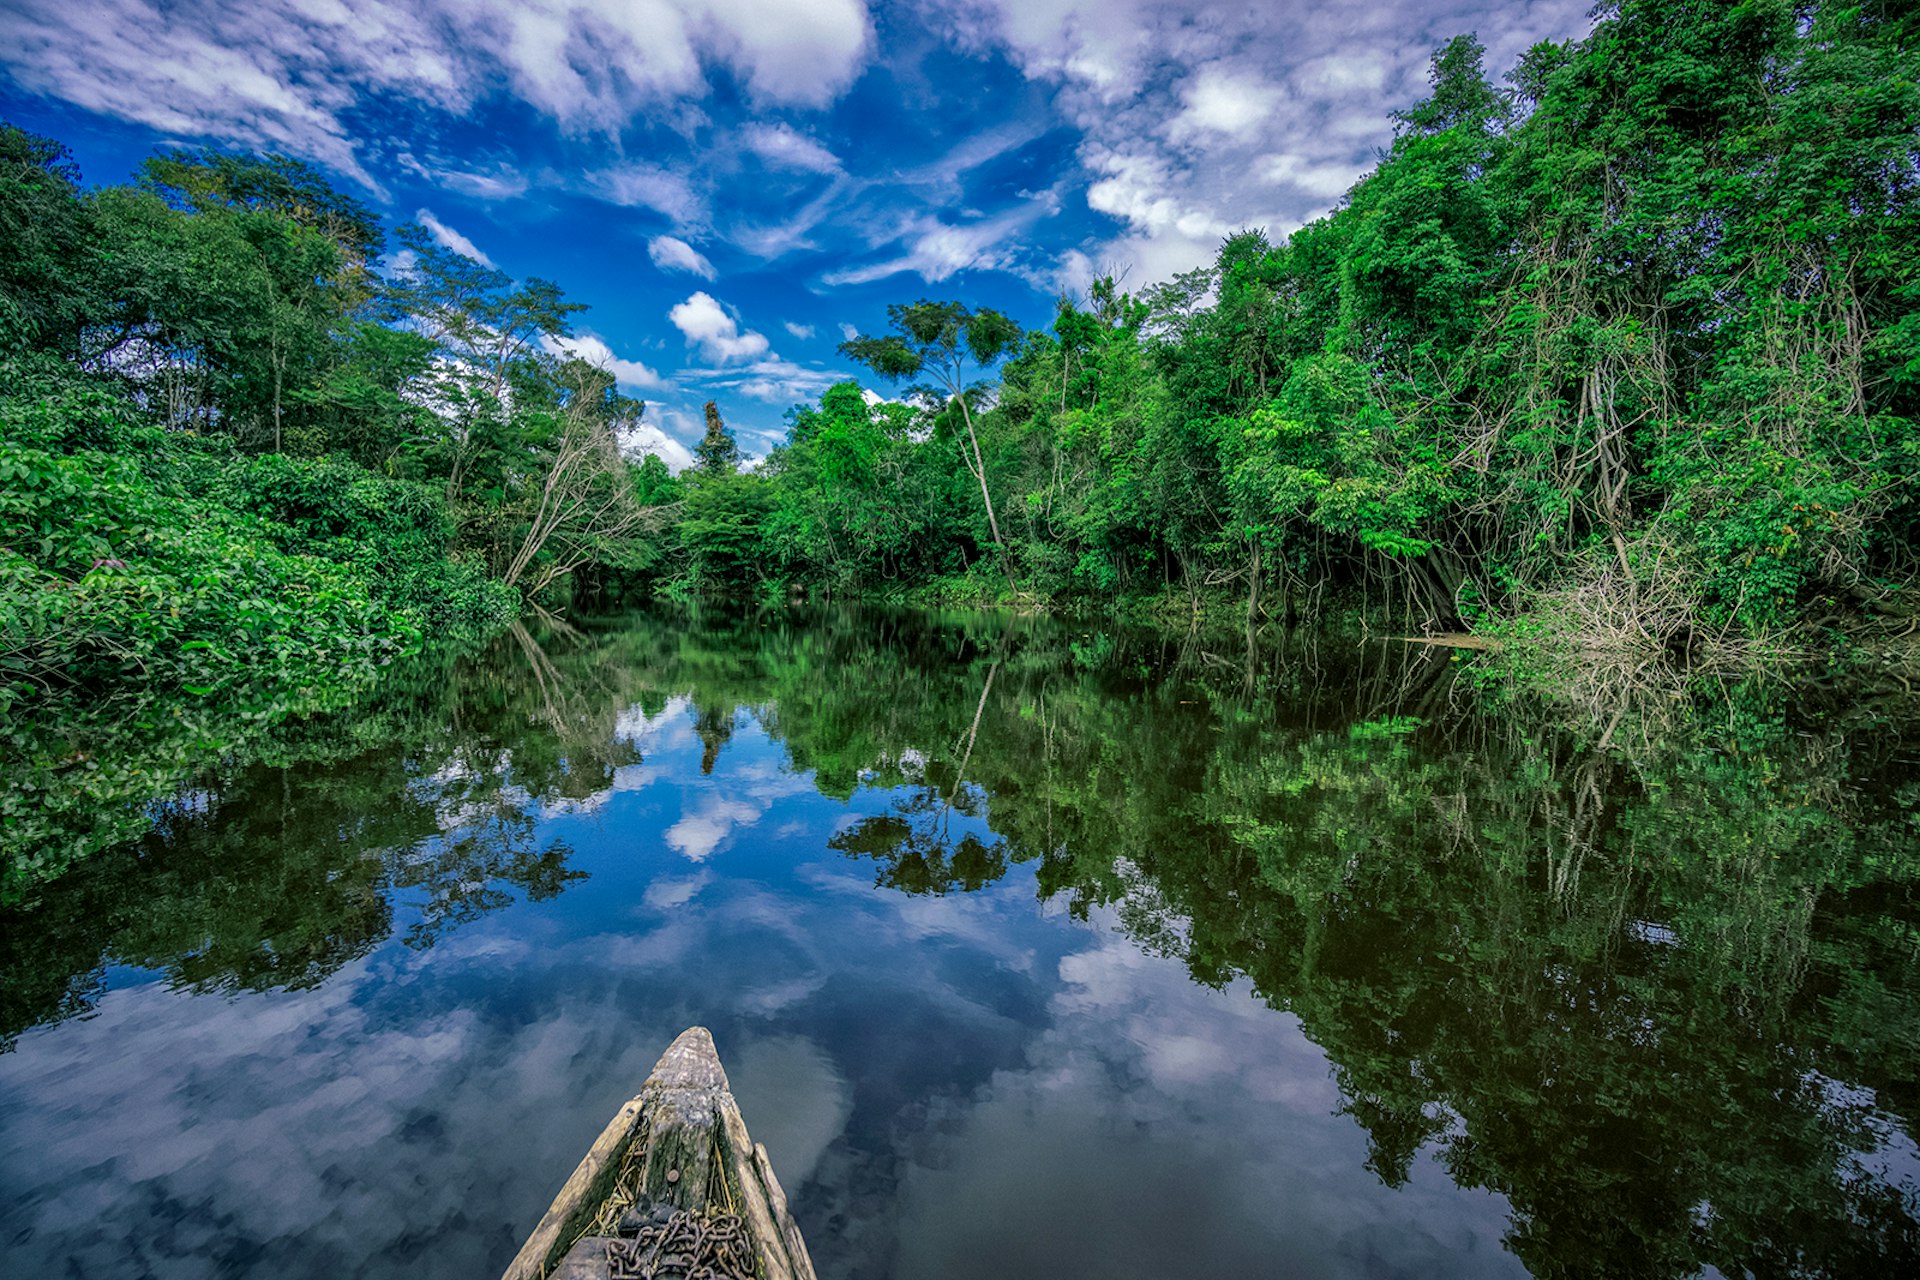 A wooden canoe drifts down a glassy Nanay river with Amazon forest on both shores. The photo is taken from the body of the canoe, with just the tip in frame. The cloudy blue sky is reflected in the still water.